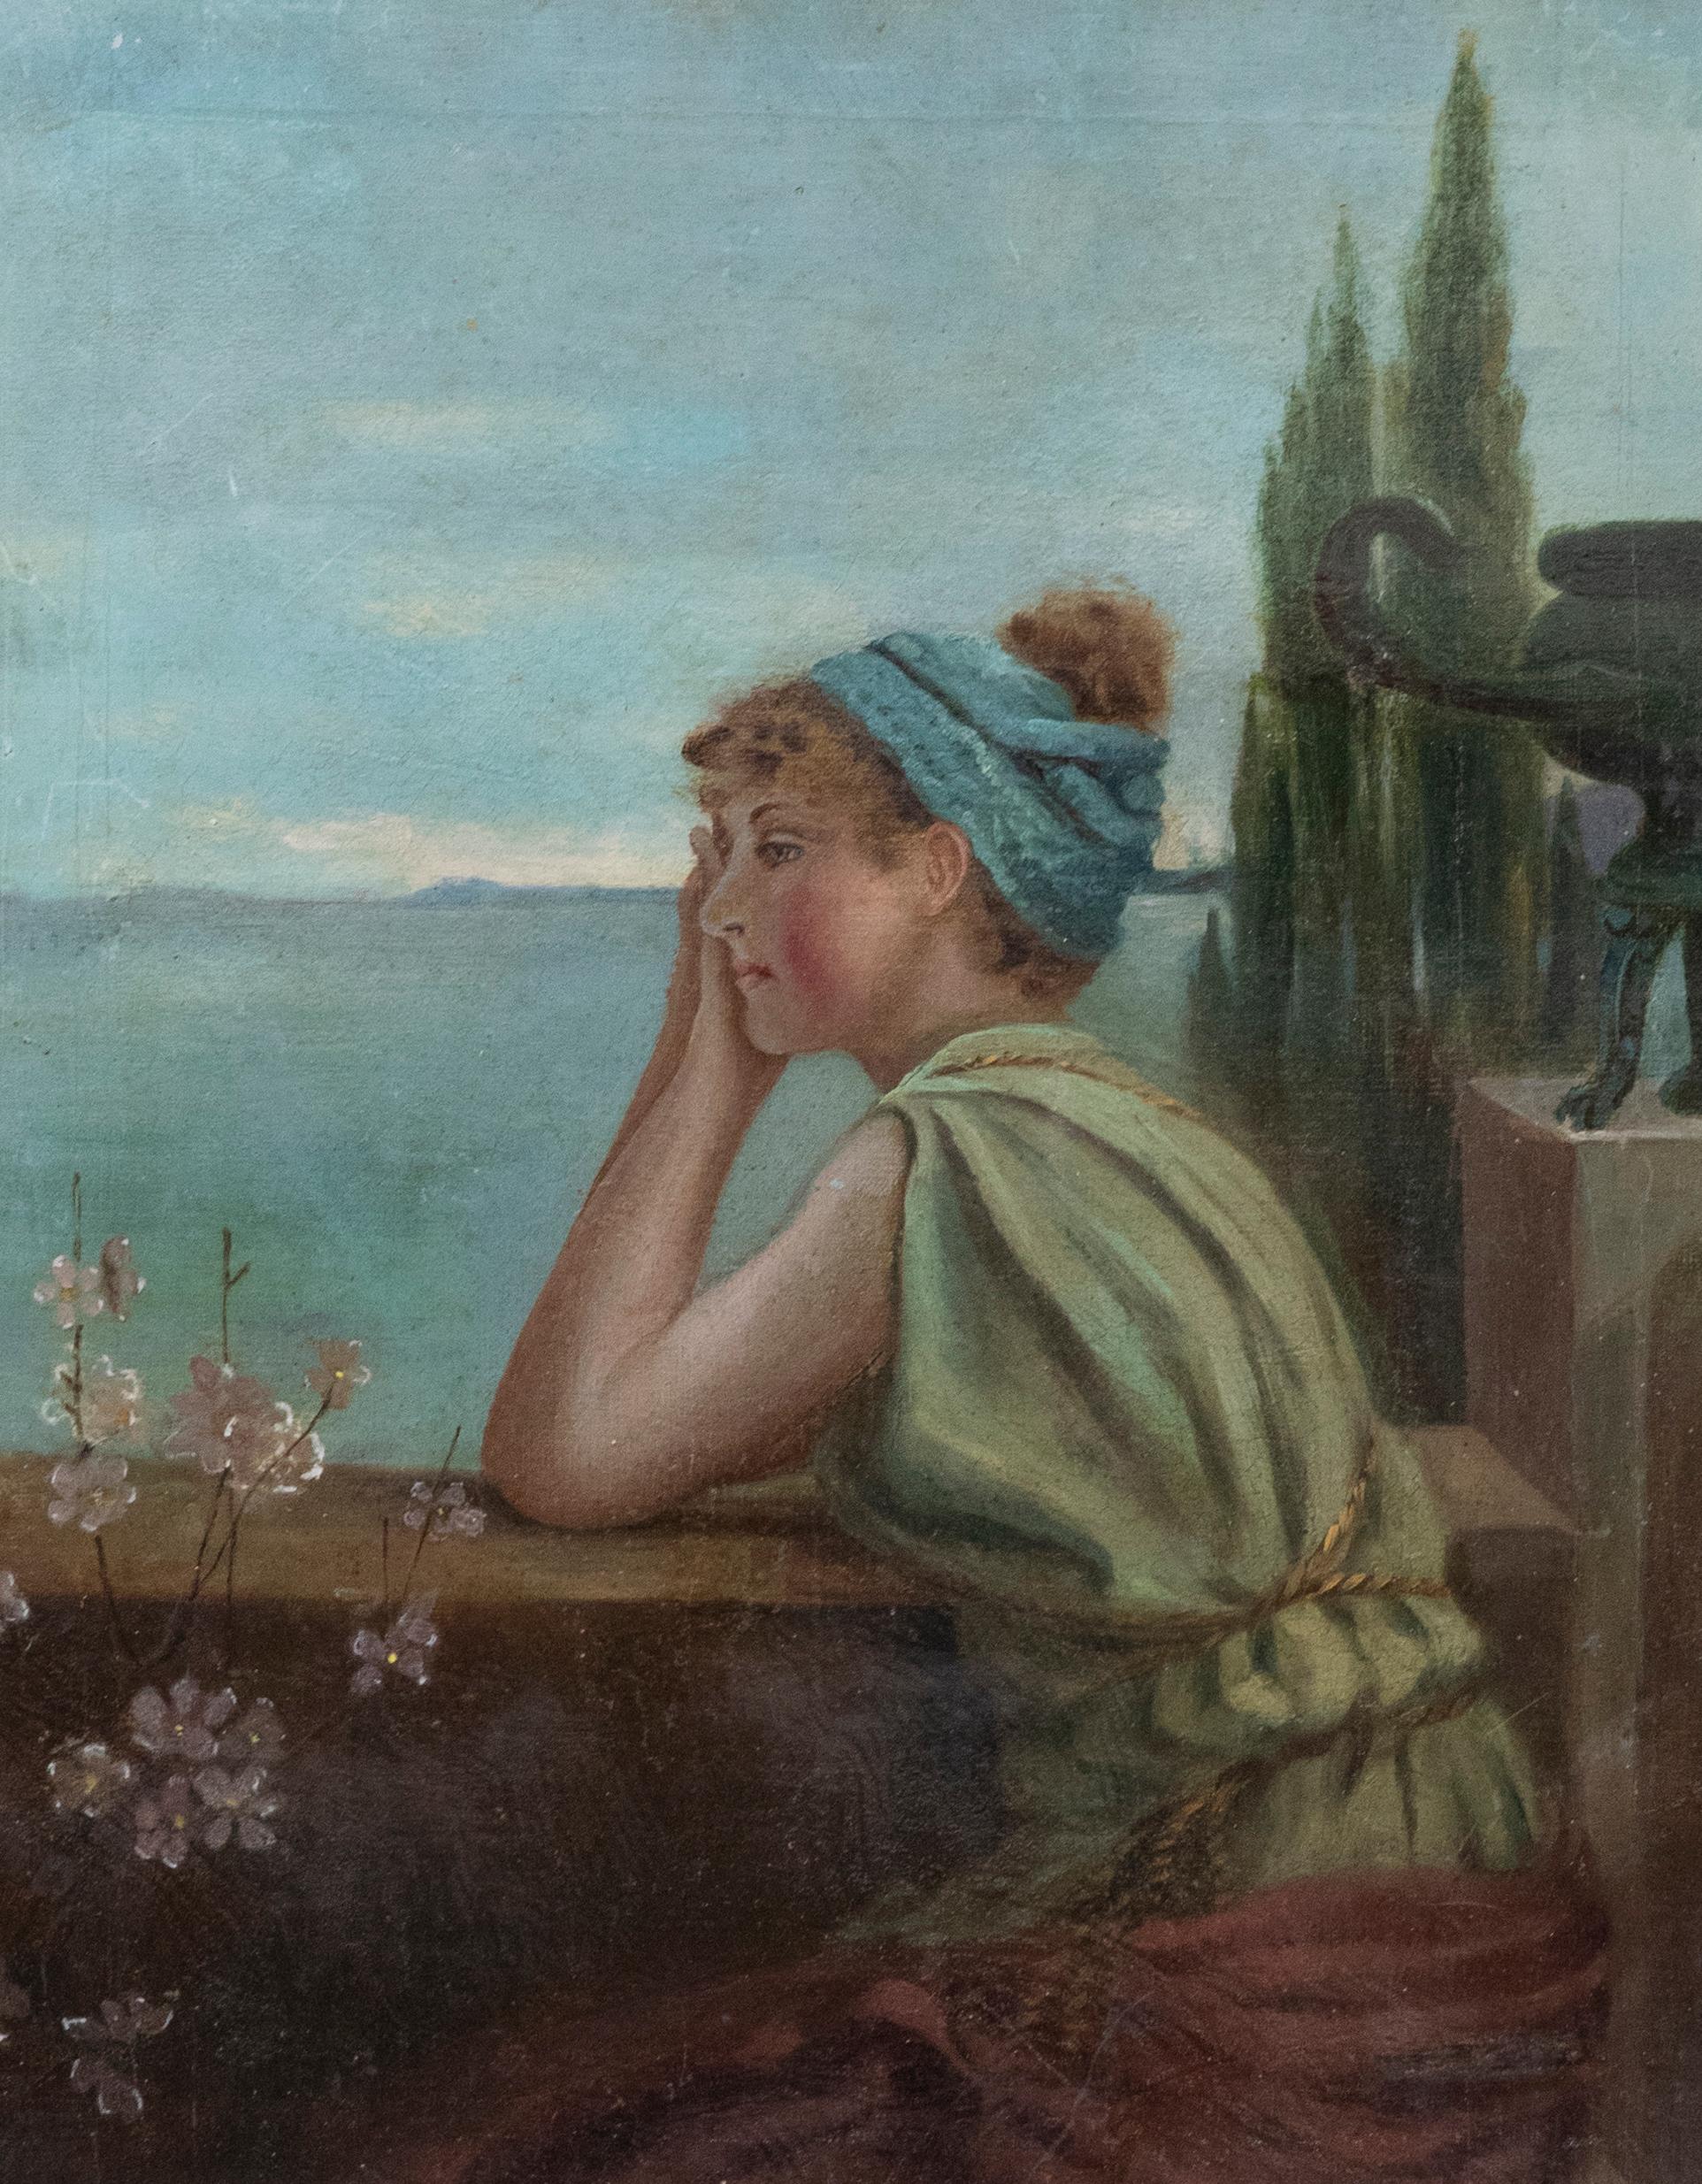 Unknown Portrait Painting - Late 19th Century Oil - The Look of Longing